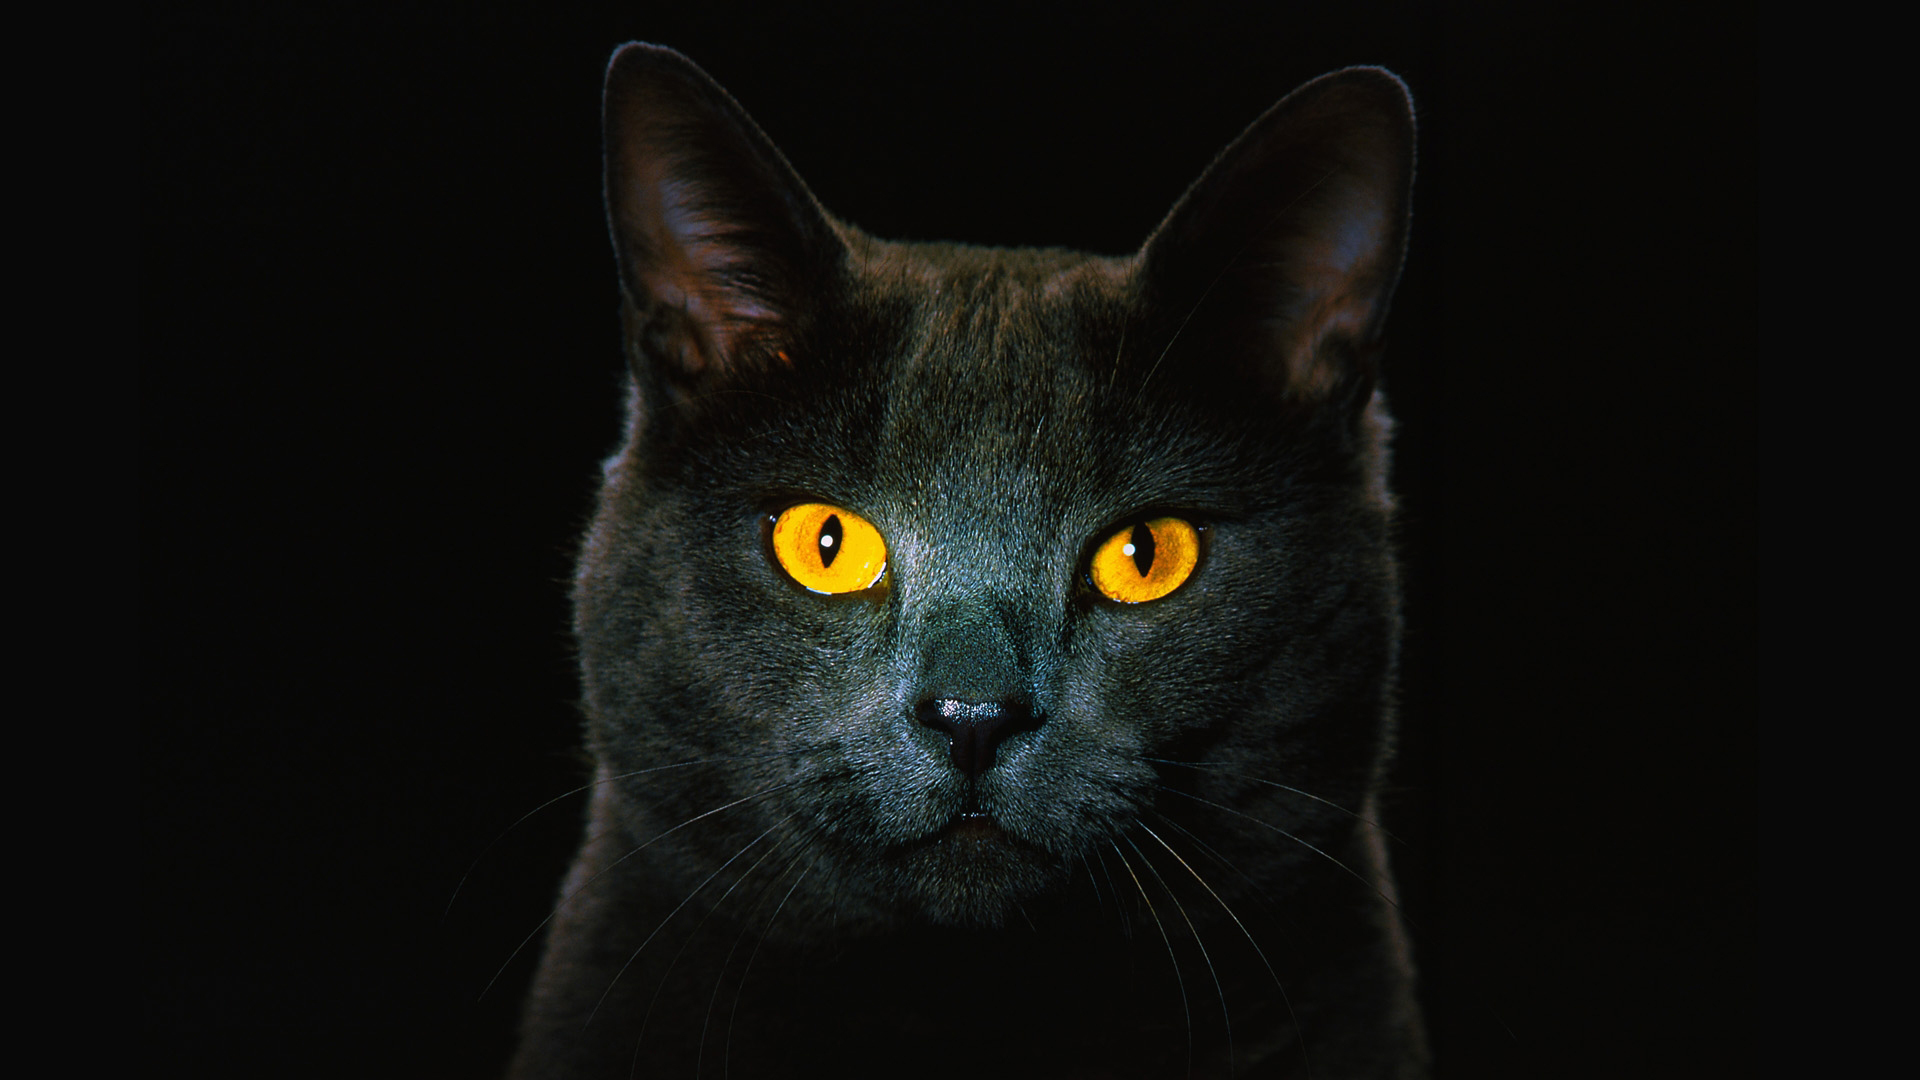 Animals___Cats_Black_cat_with_red_eyes_044843_.jpg